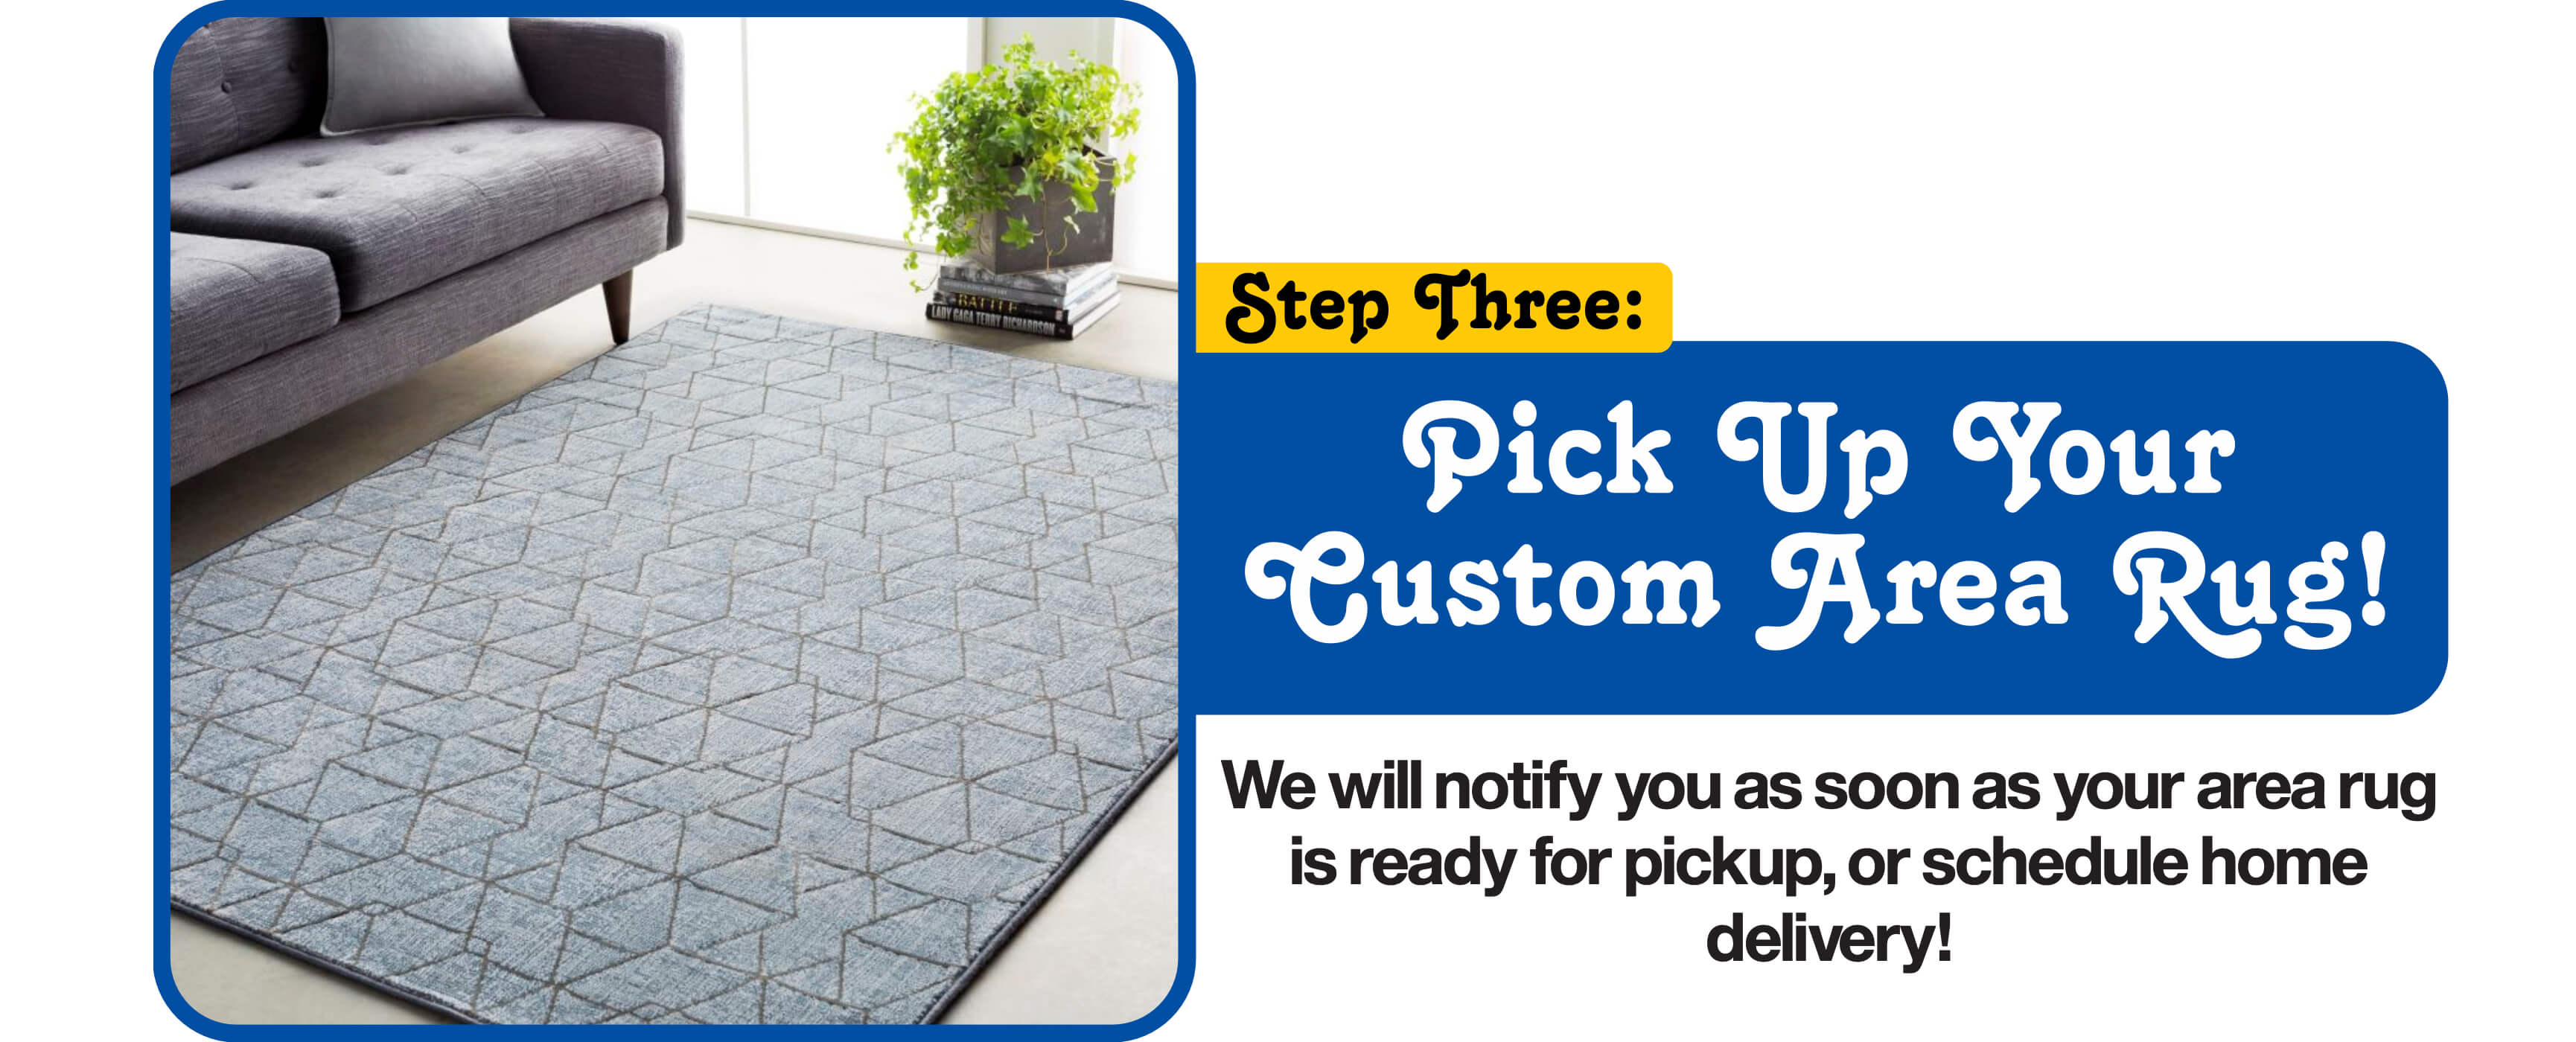 Pick Up Your Custom Area Rug!